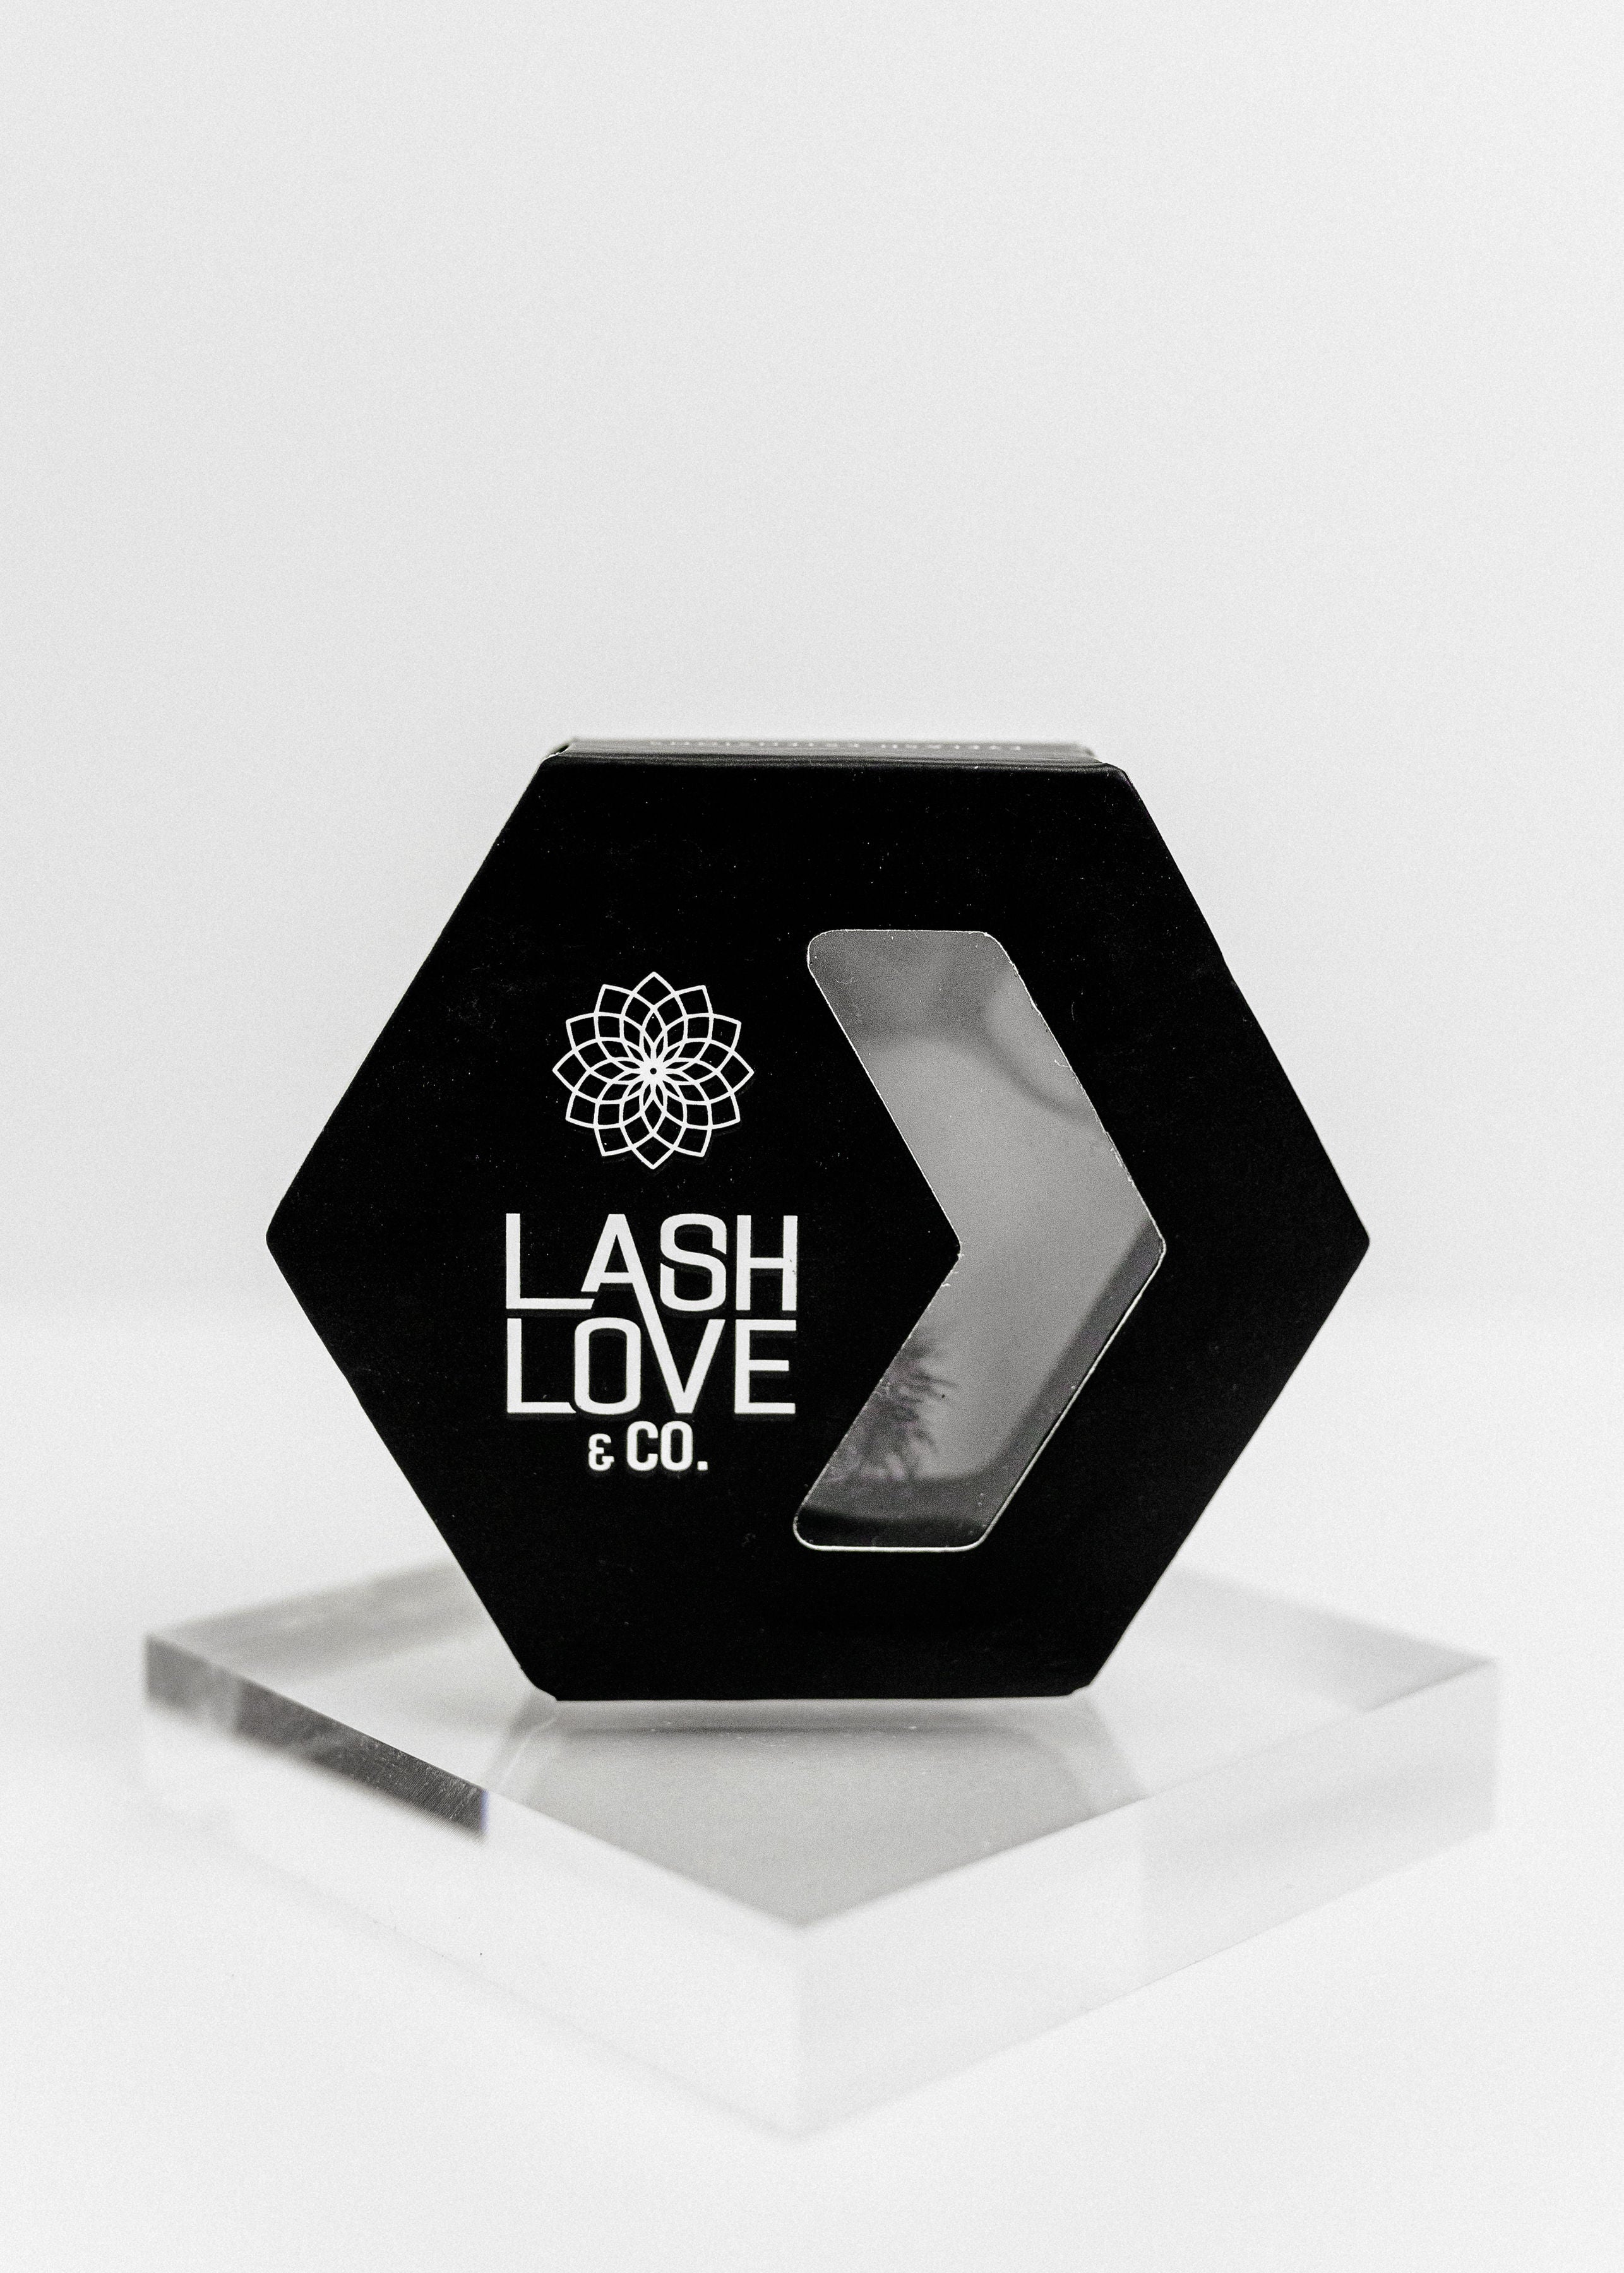 Love Lash + Company - From $21.25 - Round Rock, TX